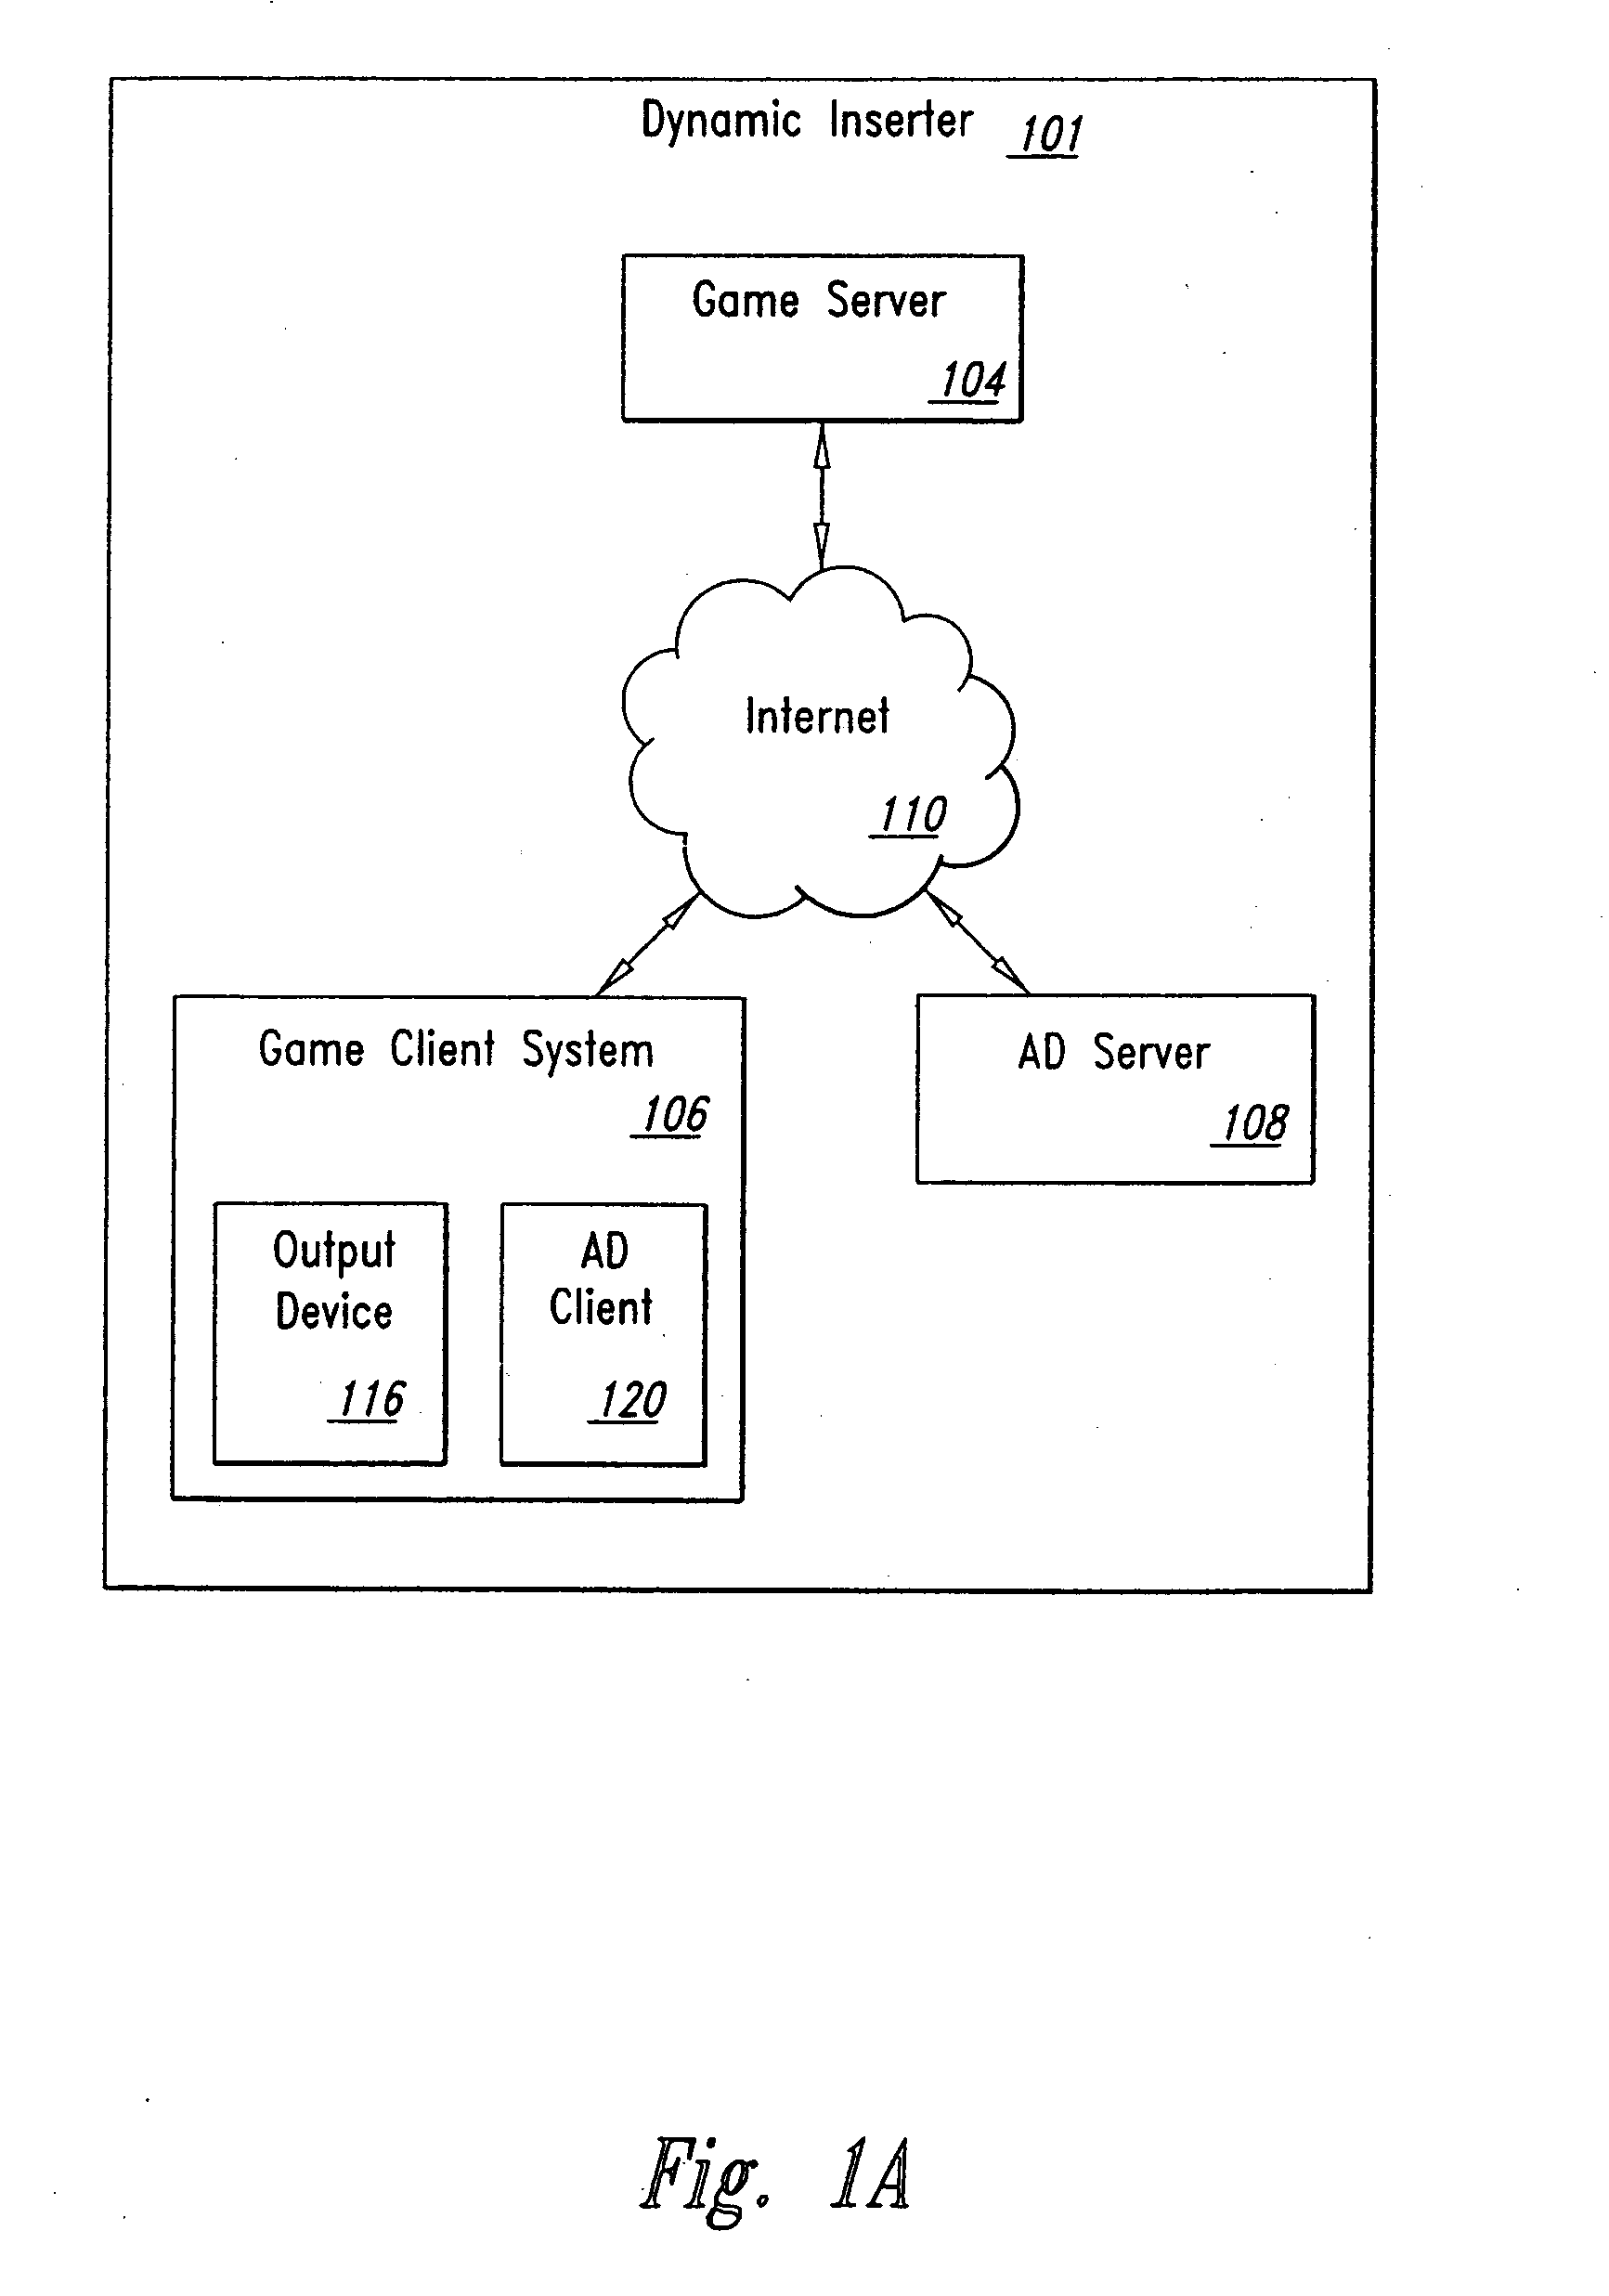 Method and system for collecting and communicating dynamically incorporated advertising information